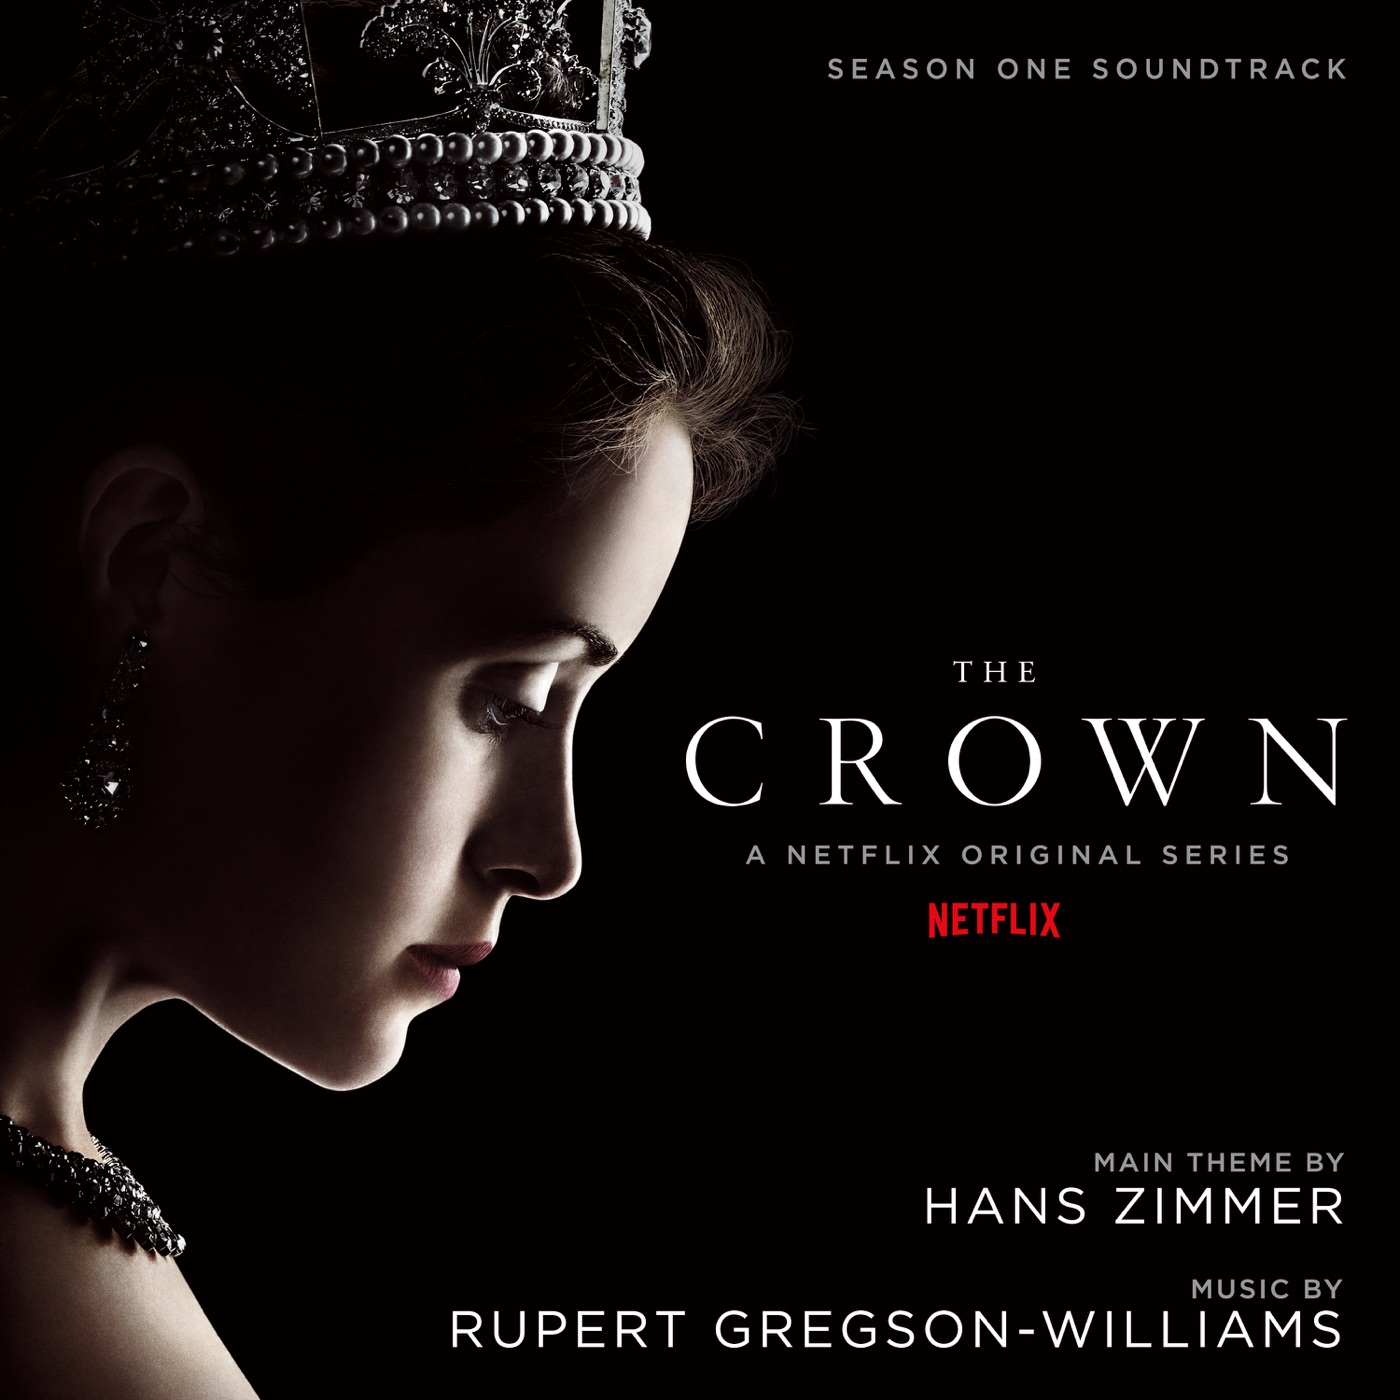 The Crown: Season One (Soundtrack from the Netflix Original Series) by Rupert Gregson-Williams, Hans Zimmer, The Crown: Season One (Soundtrack from the Netflix Original Series)